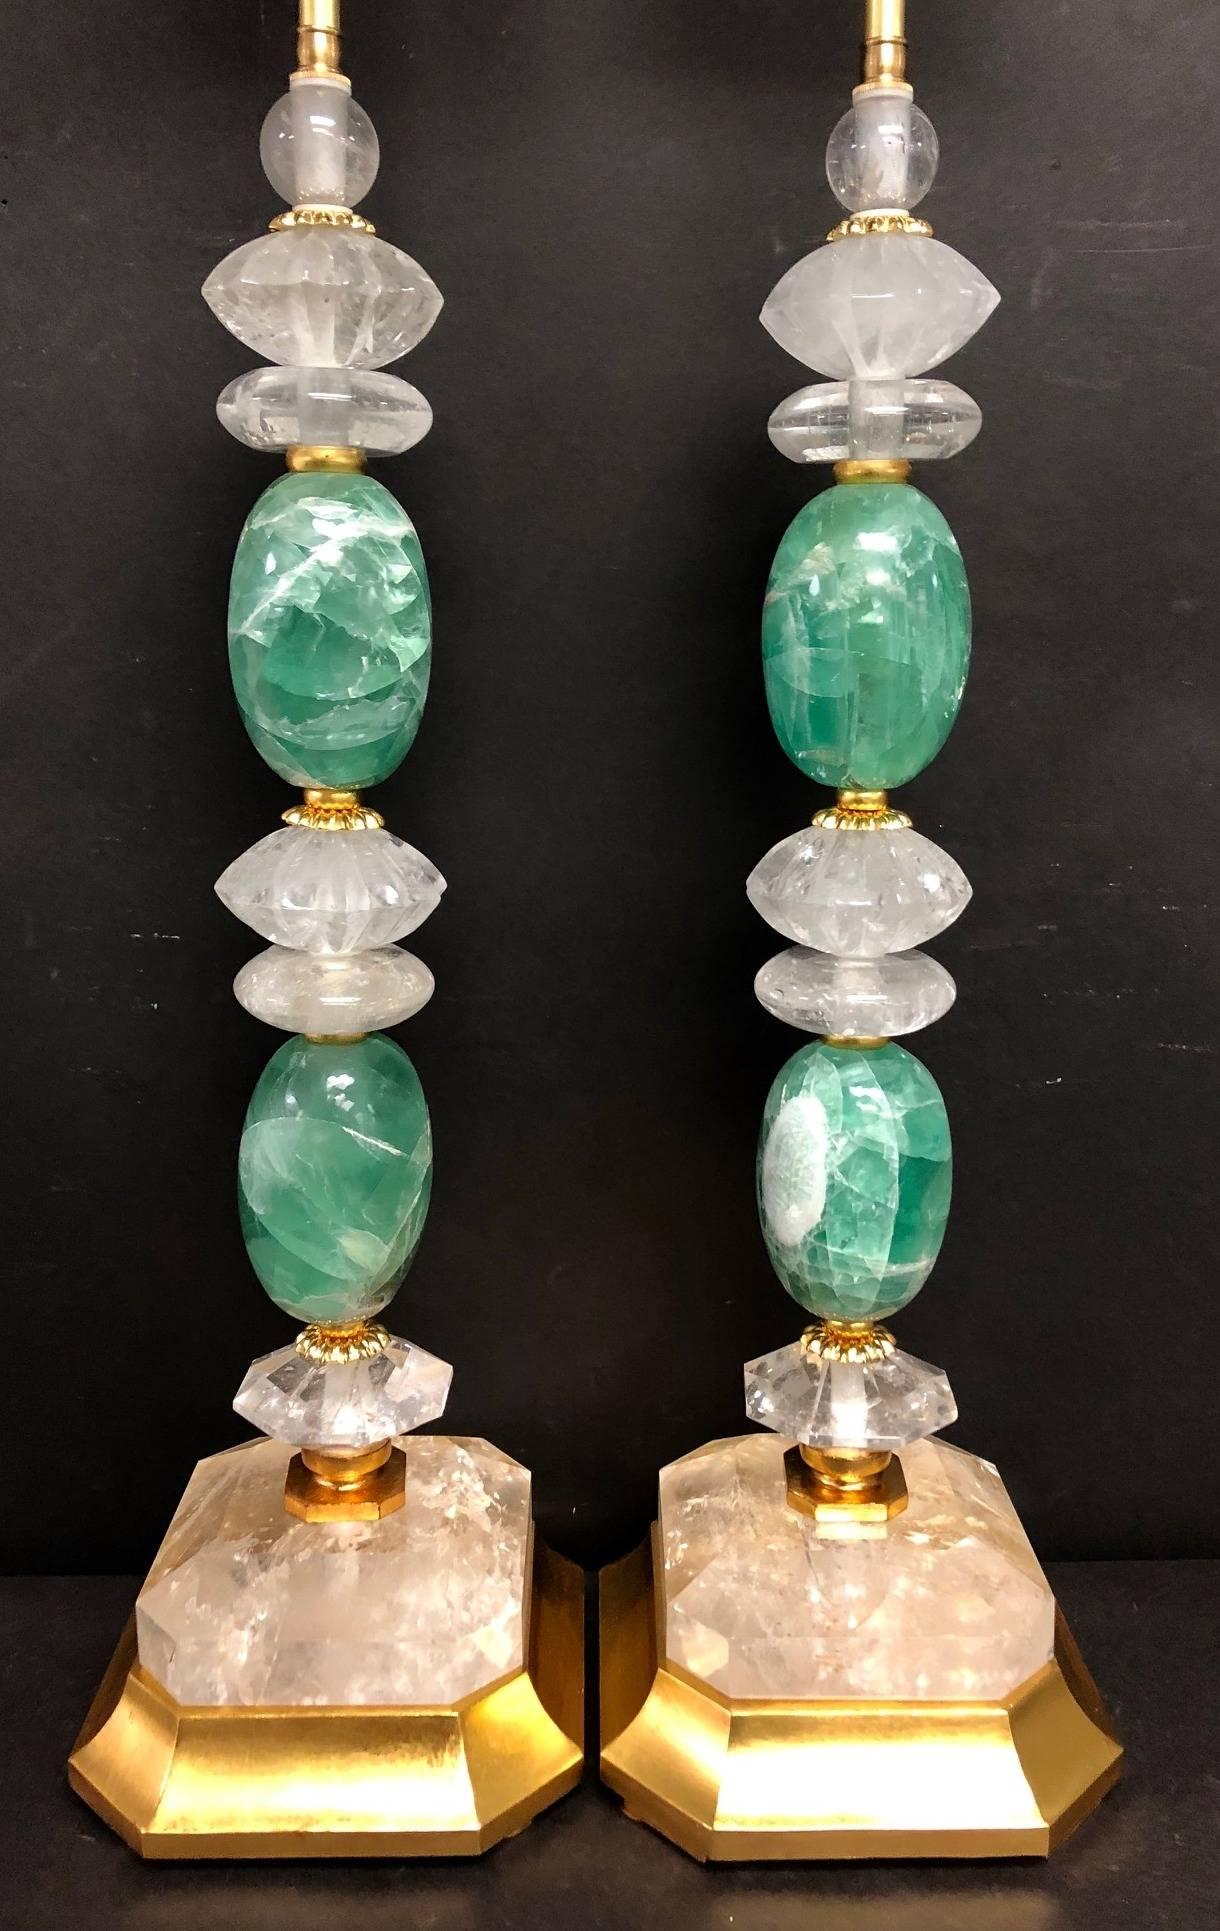 A wonderful Mid-Century Modern pair of rock and green quartz crystal gold gilt lamps completely rewired and ready to enjoy.